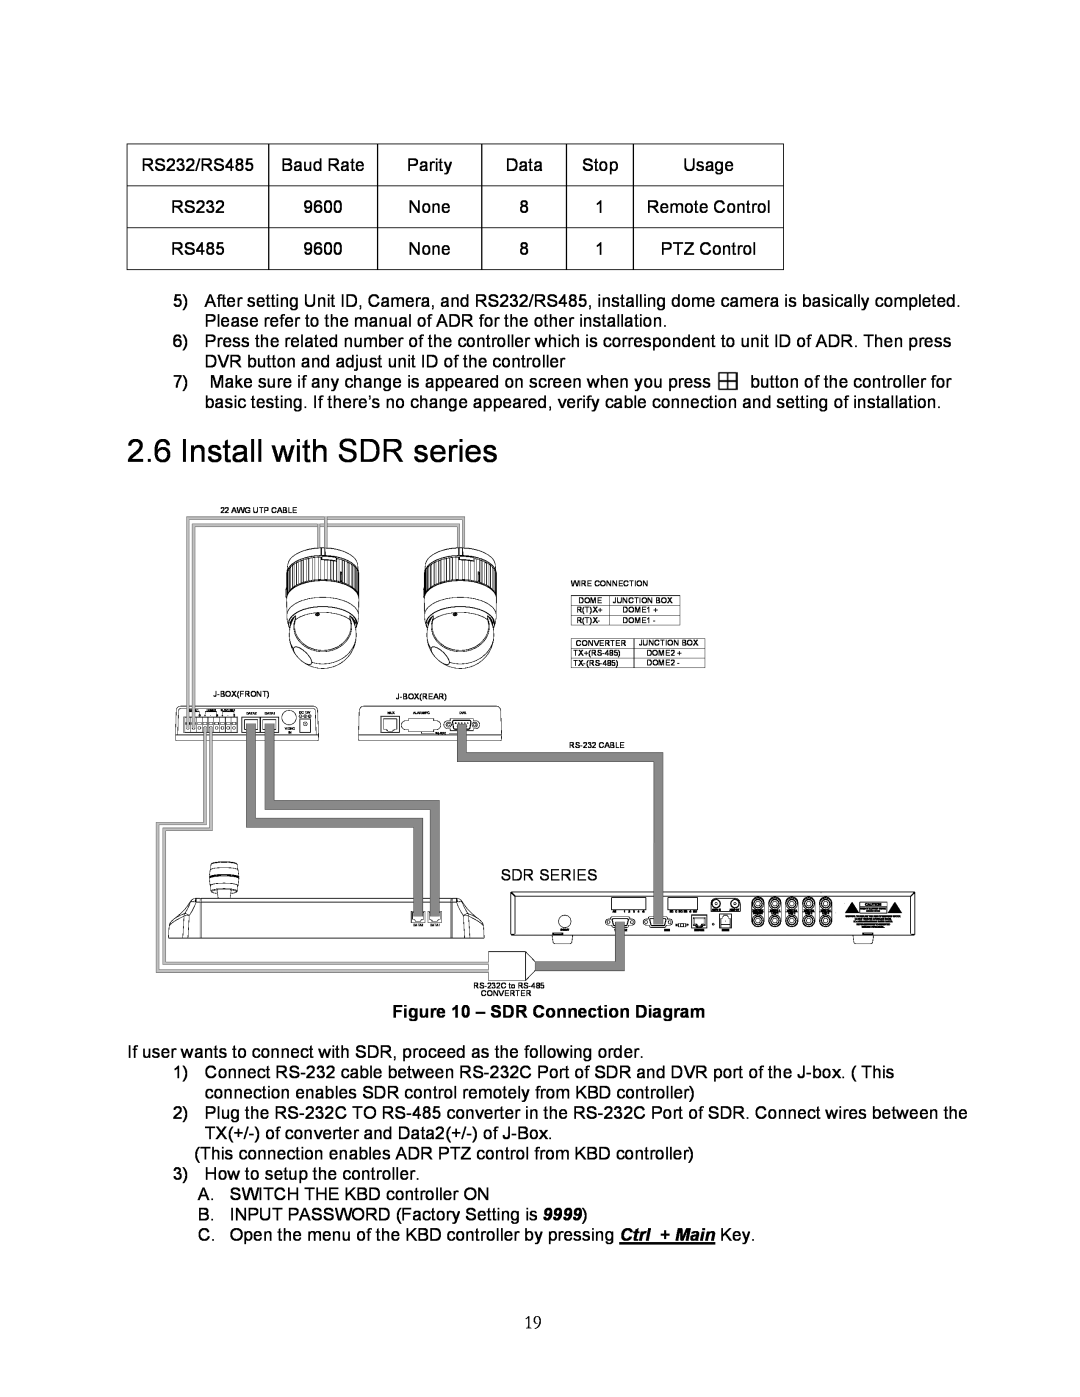 Speco Technologies KBD-927 instruction manual Install with SDR series, SDR Connection Diagram 